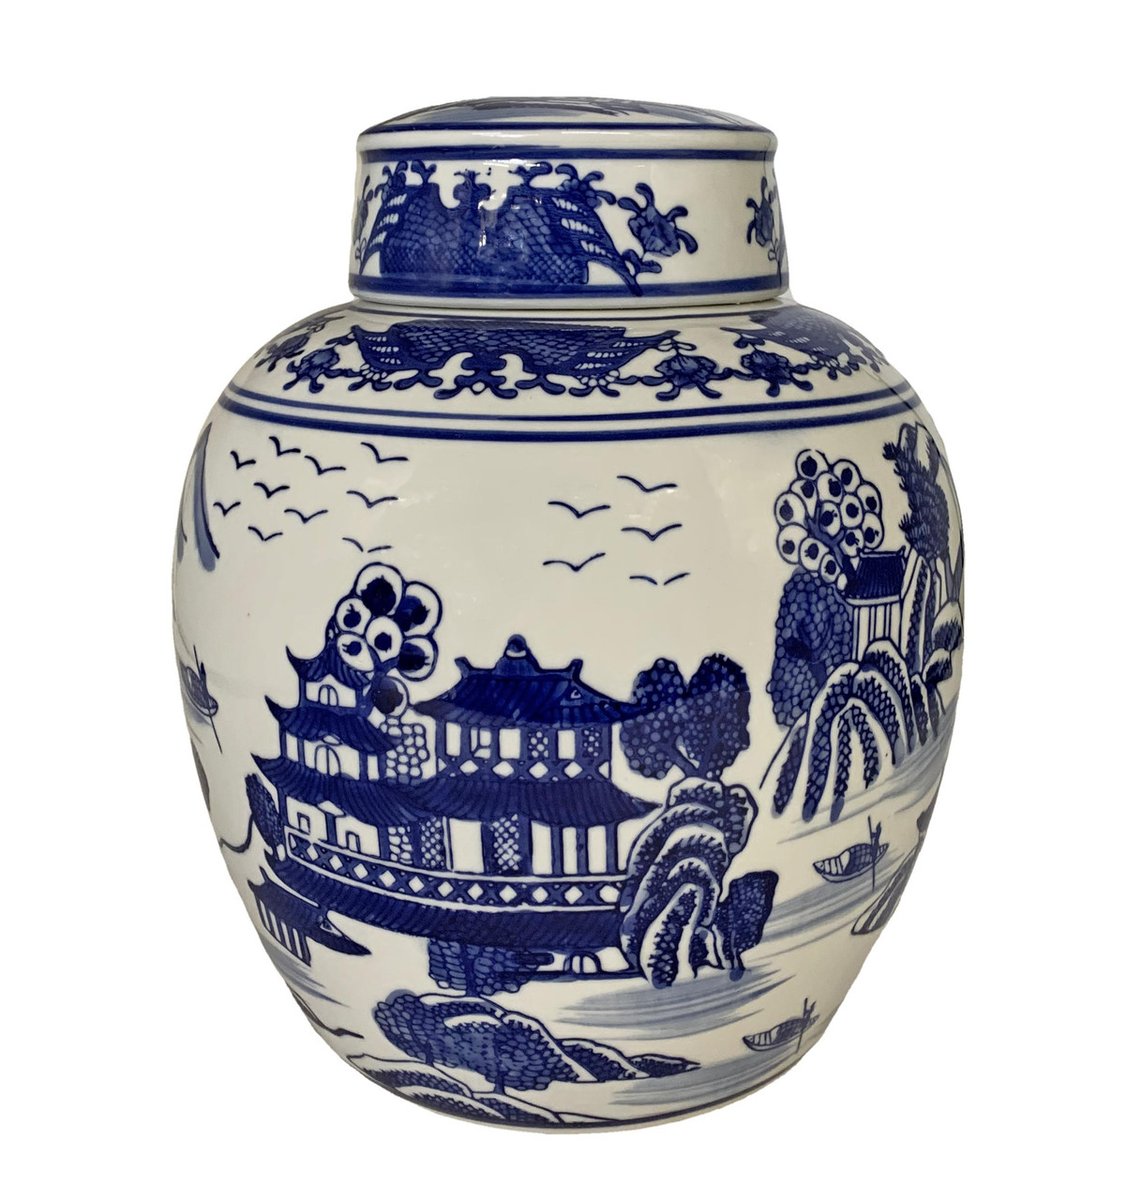 #orientalpottery Chinese 9' Ginger Jar In Export Blue and White Porcelain Landscape Seen here: bit.ly/3JL7a8G